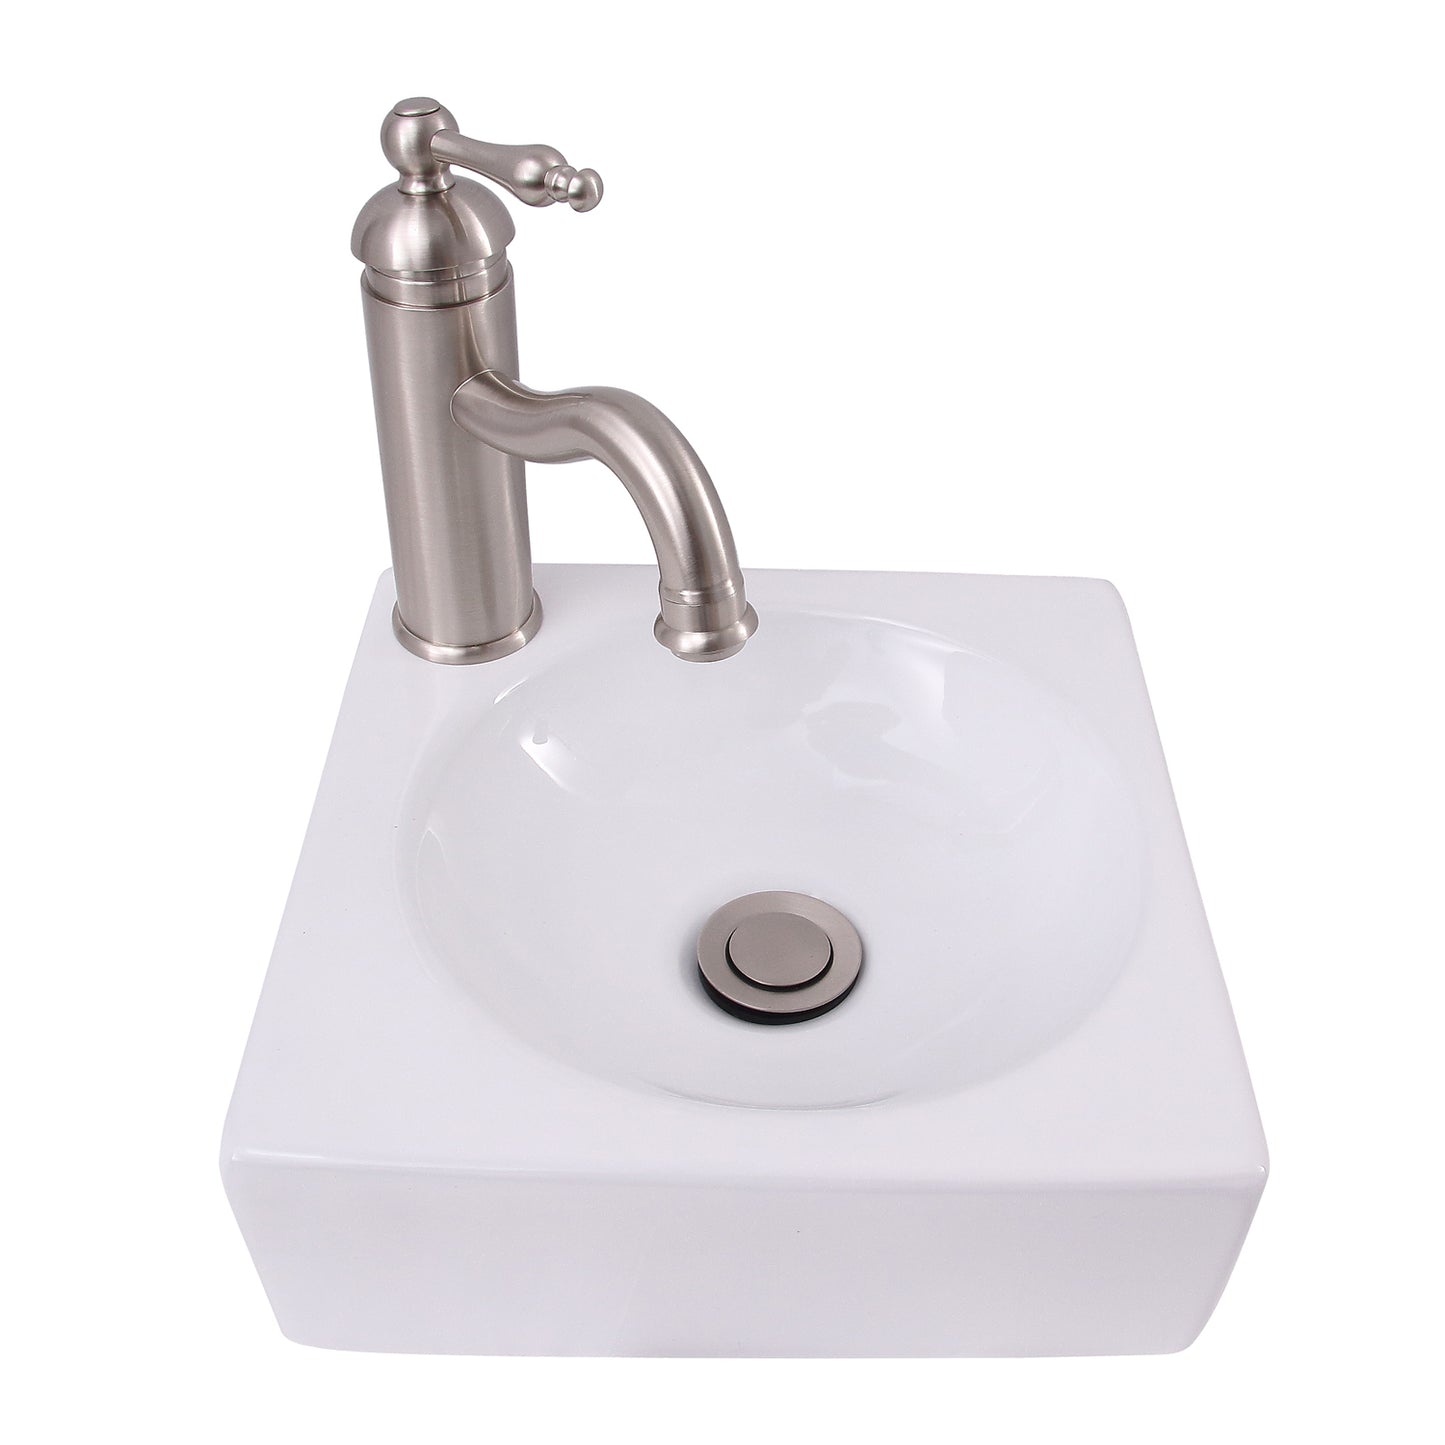 Trixie 11" Petite Wall Hung Bathroom Sink White 1 Faucet Hole